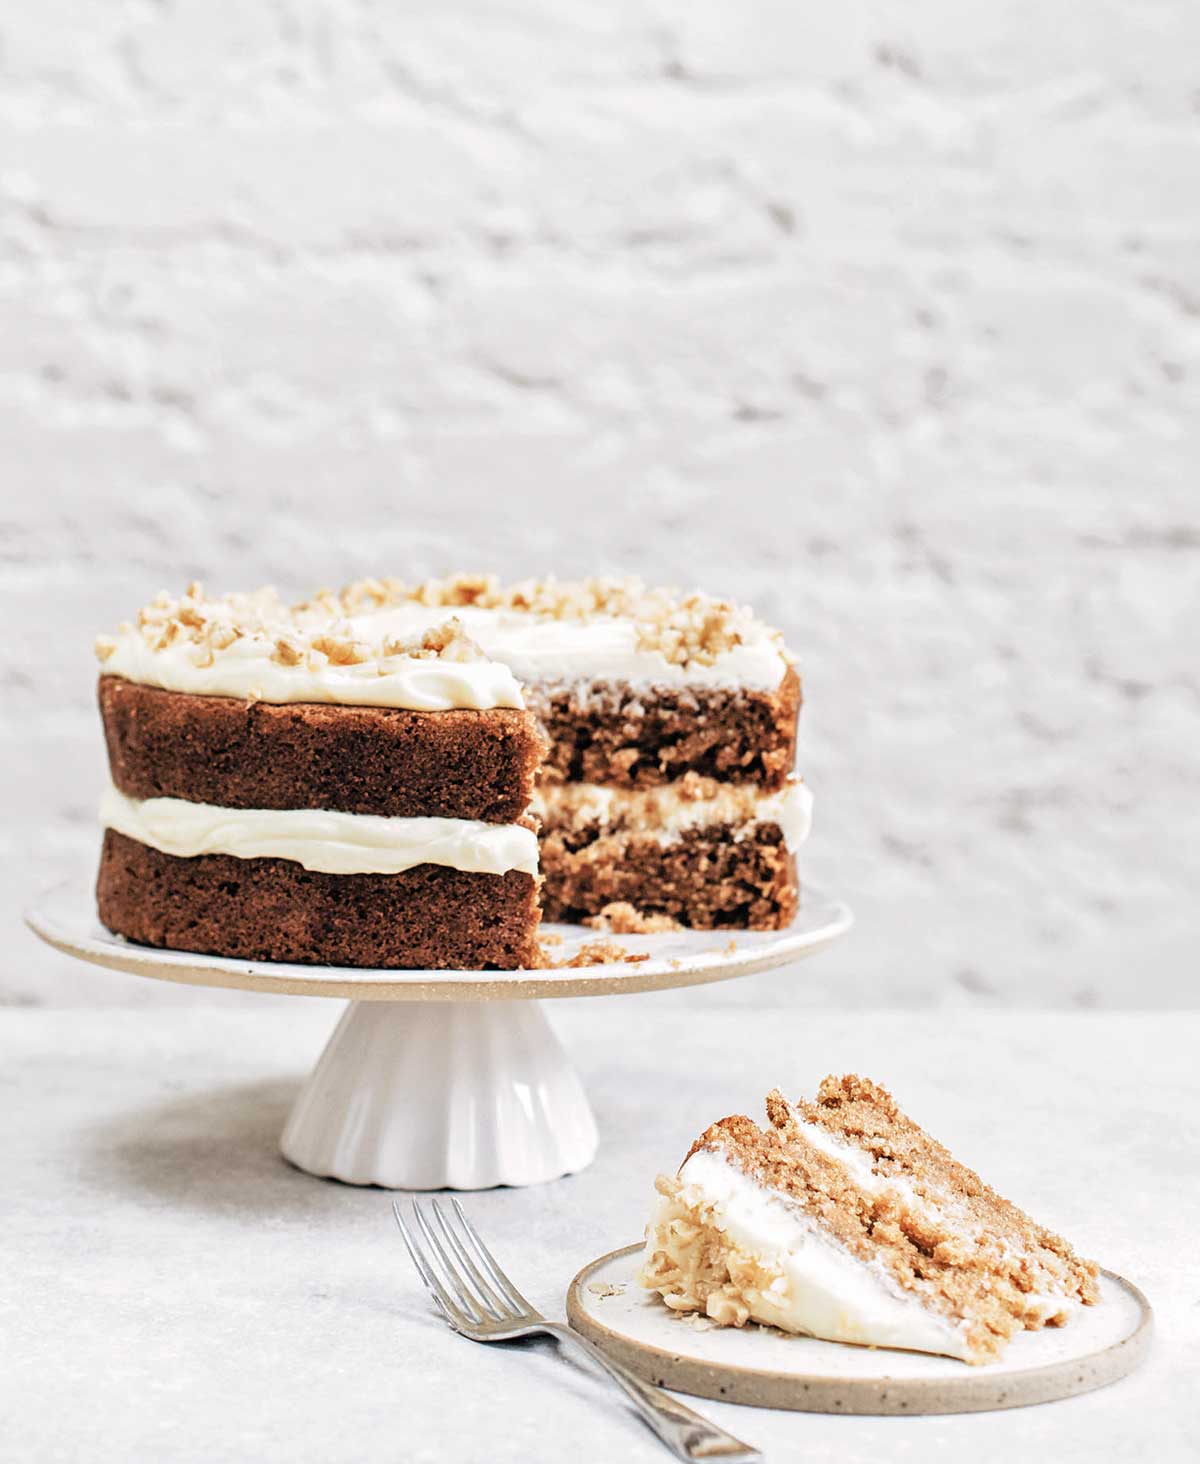 A whole two layer spiced carrot cake on a white cake stand with one slice cut from it on a plate with a fork beside it.